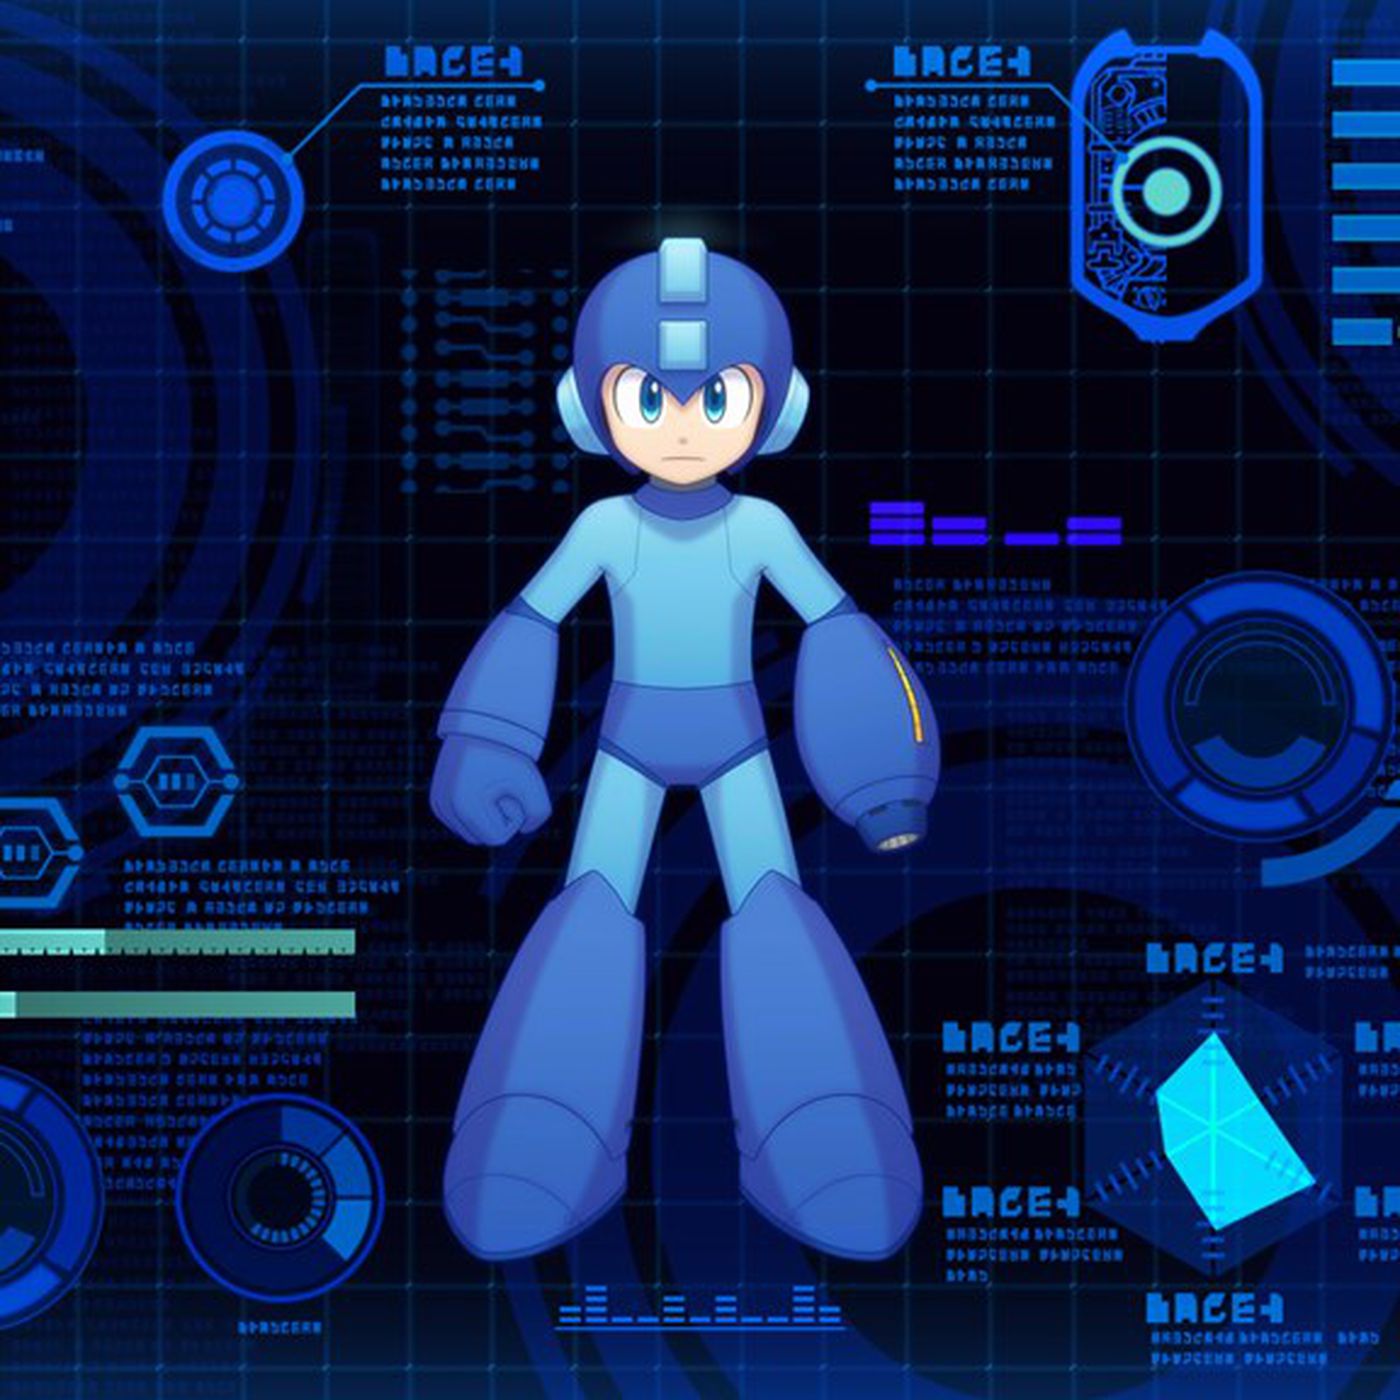 Does Megaman 11 deserve to be the best-selling game in the franchise?